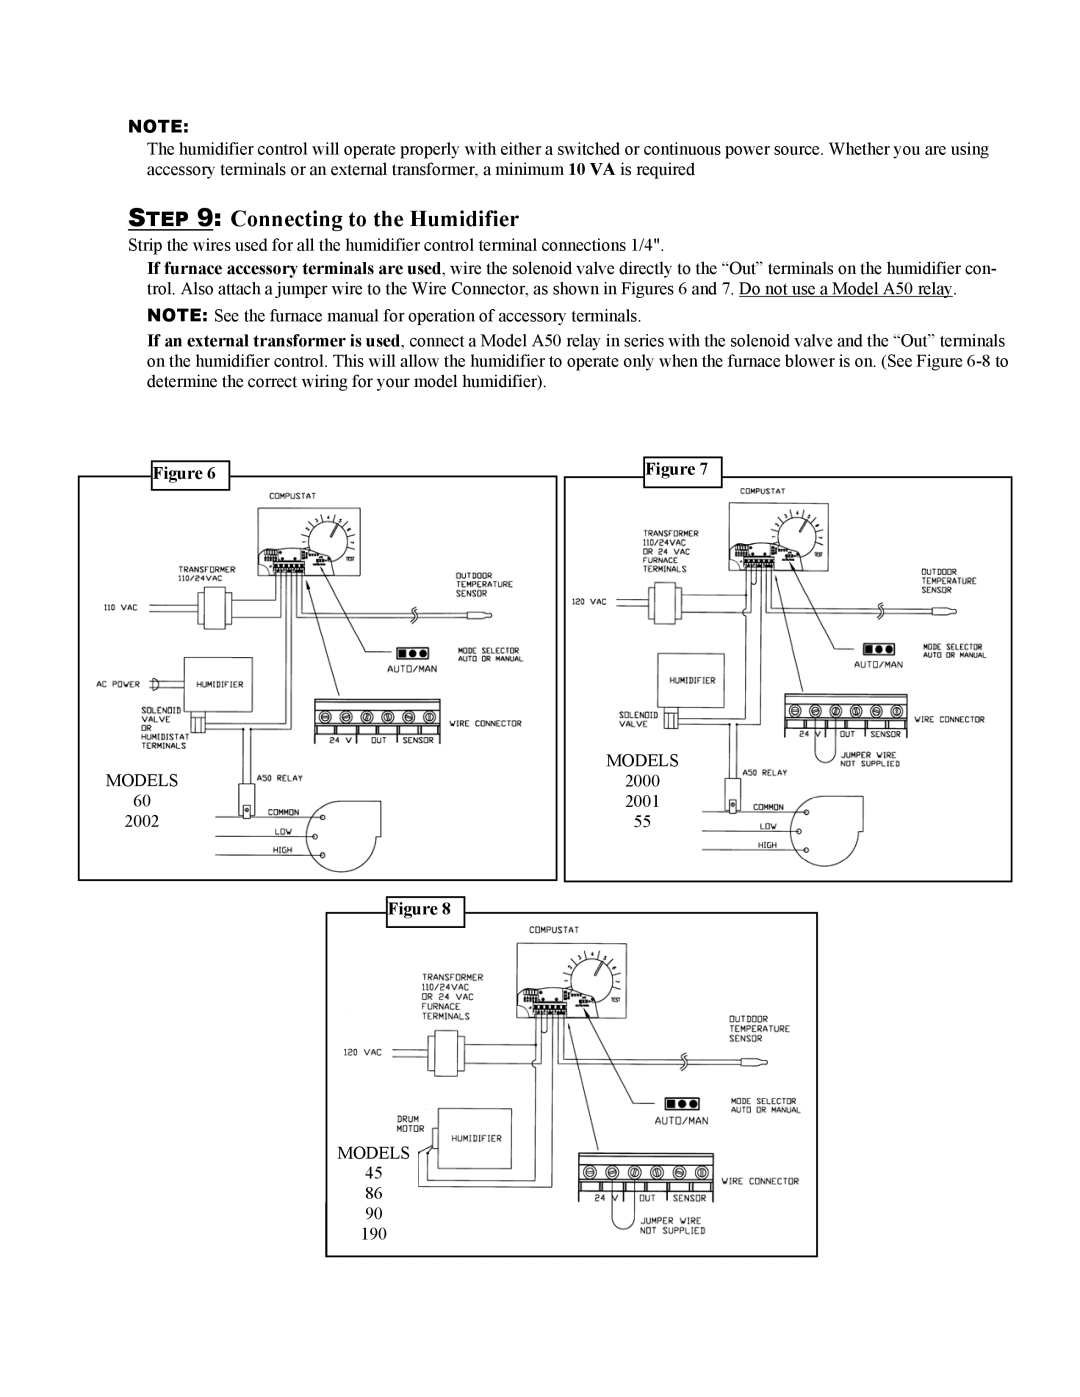 Skuttle Indoor Air Quality Products SEH-7100-000 installation instructions Connecting to the Humidifier 